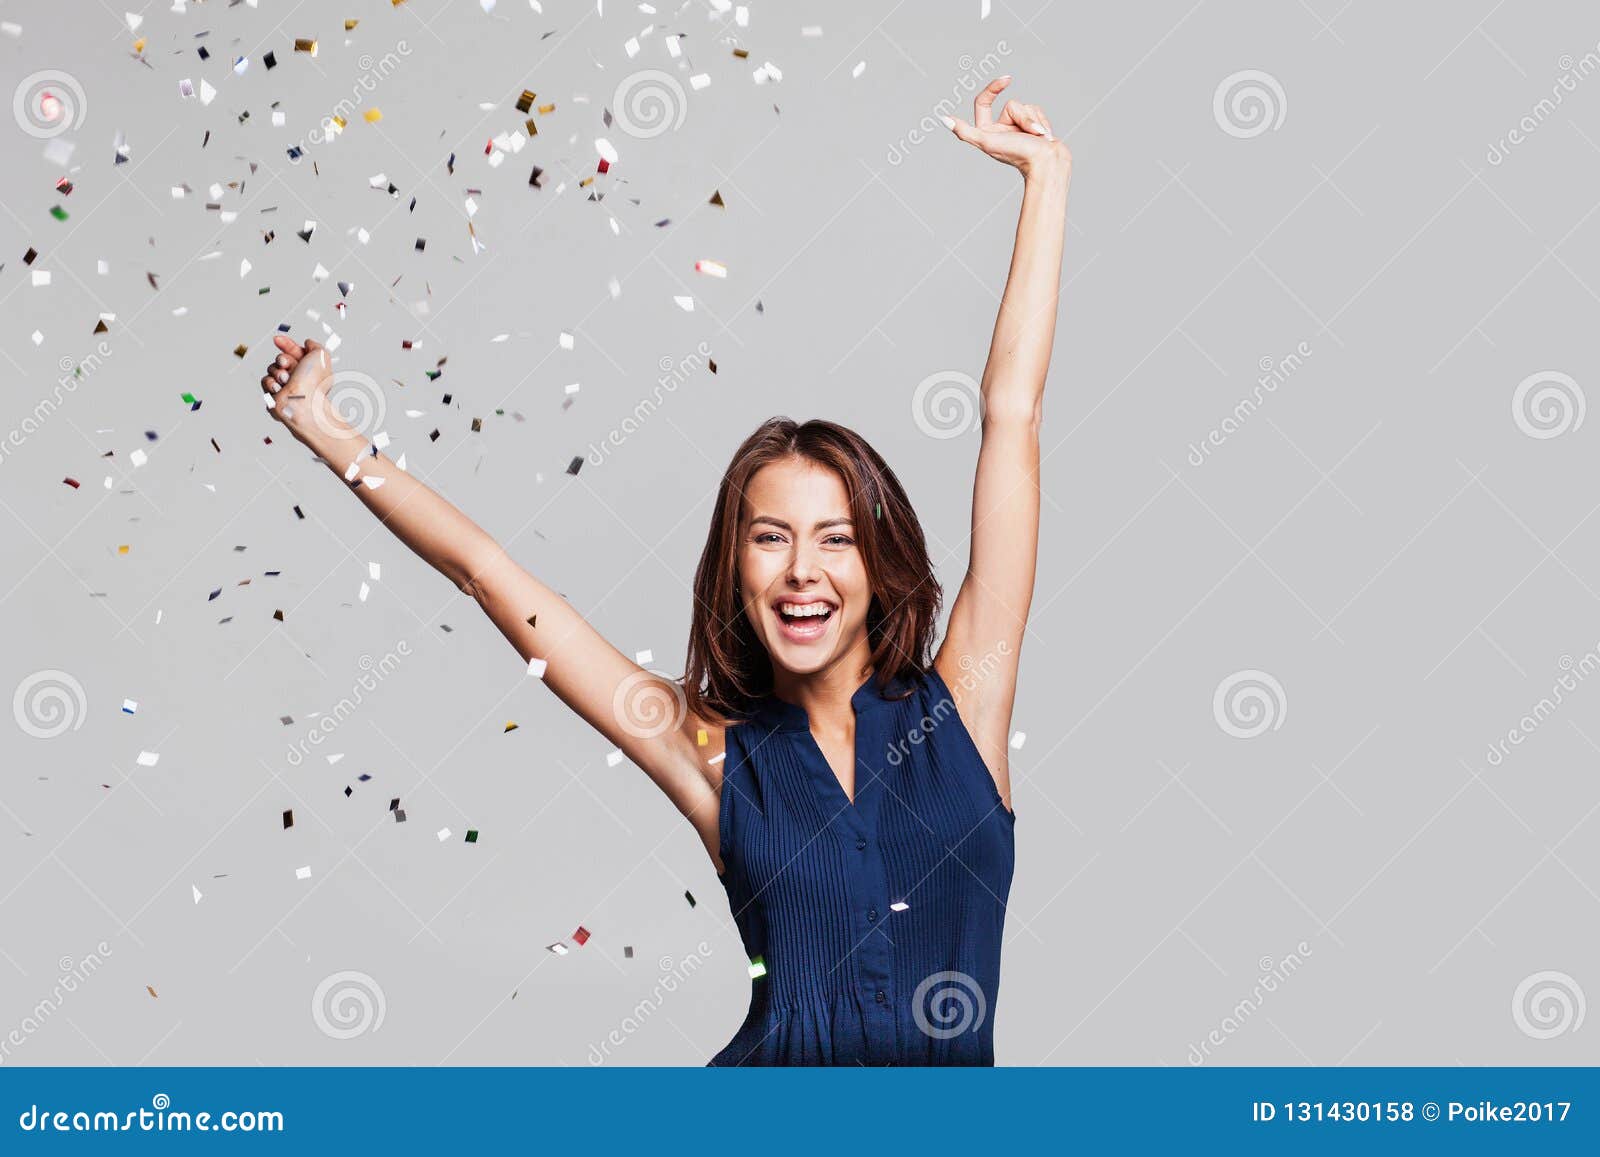 beautiful happy woman at celebration party with confetti falling everywhere on her. birthday or new year eve celebrating concept